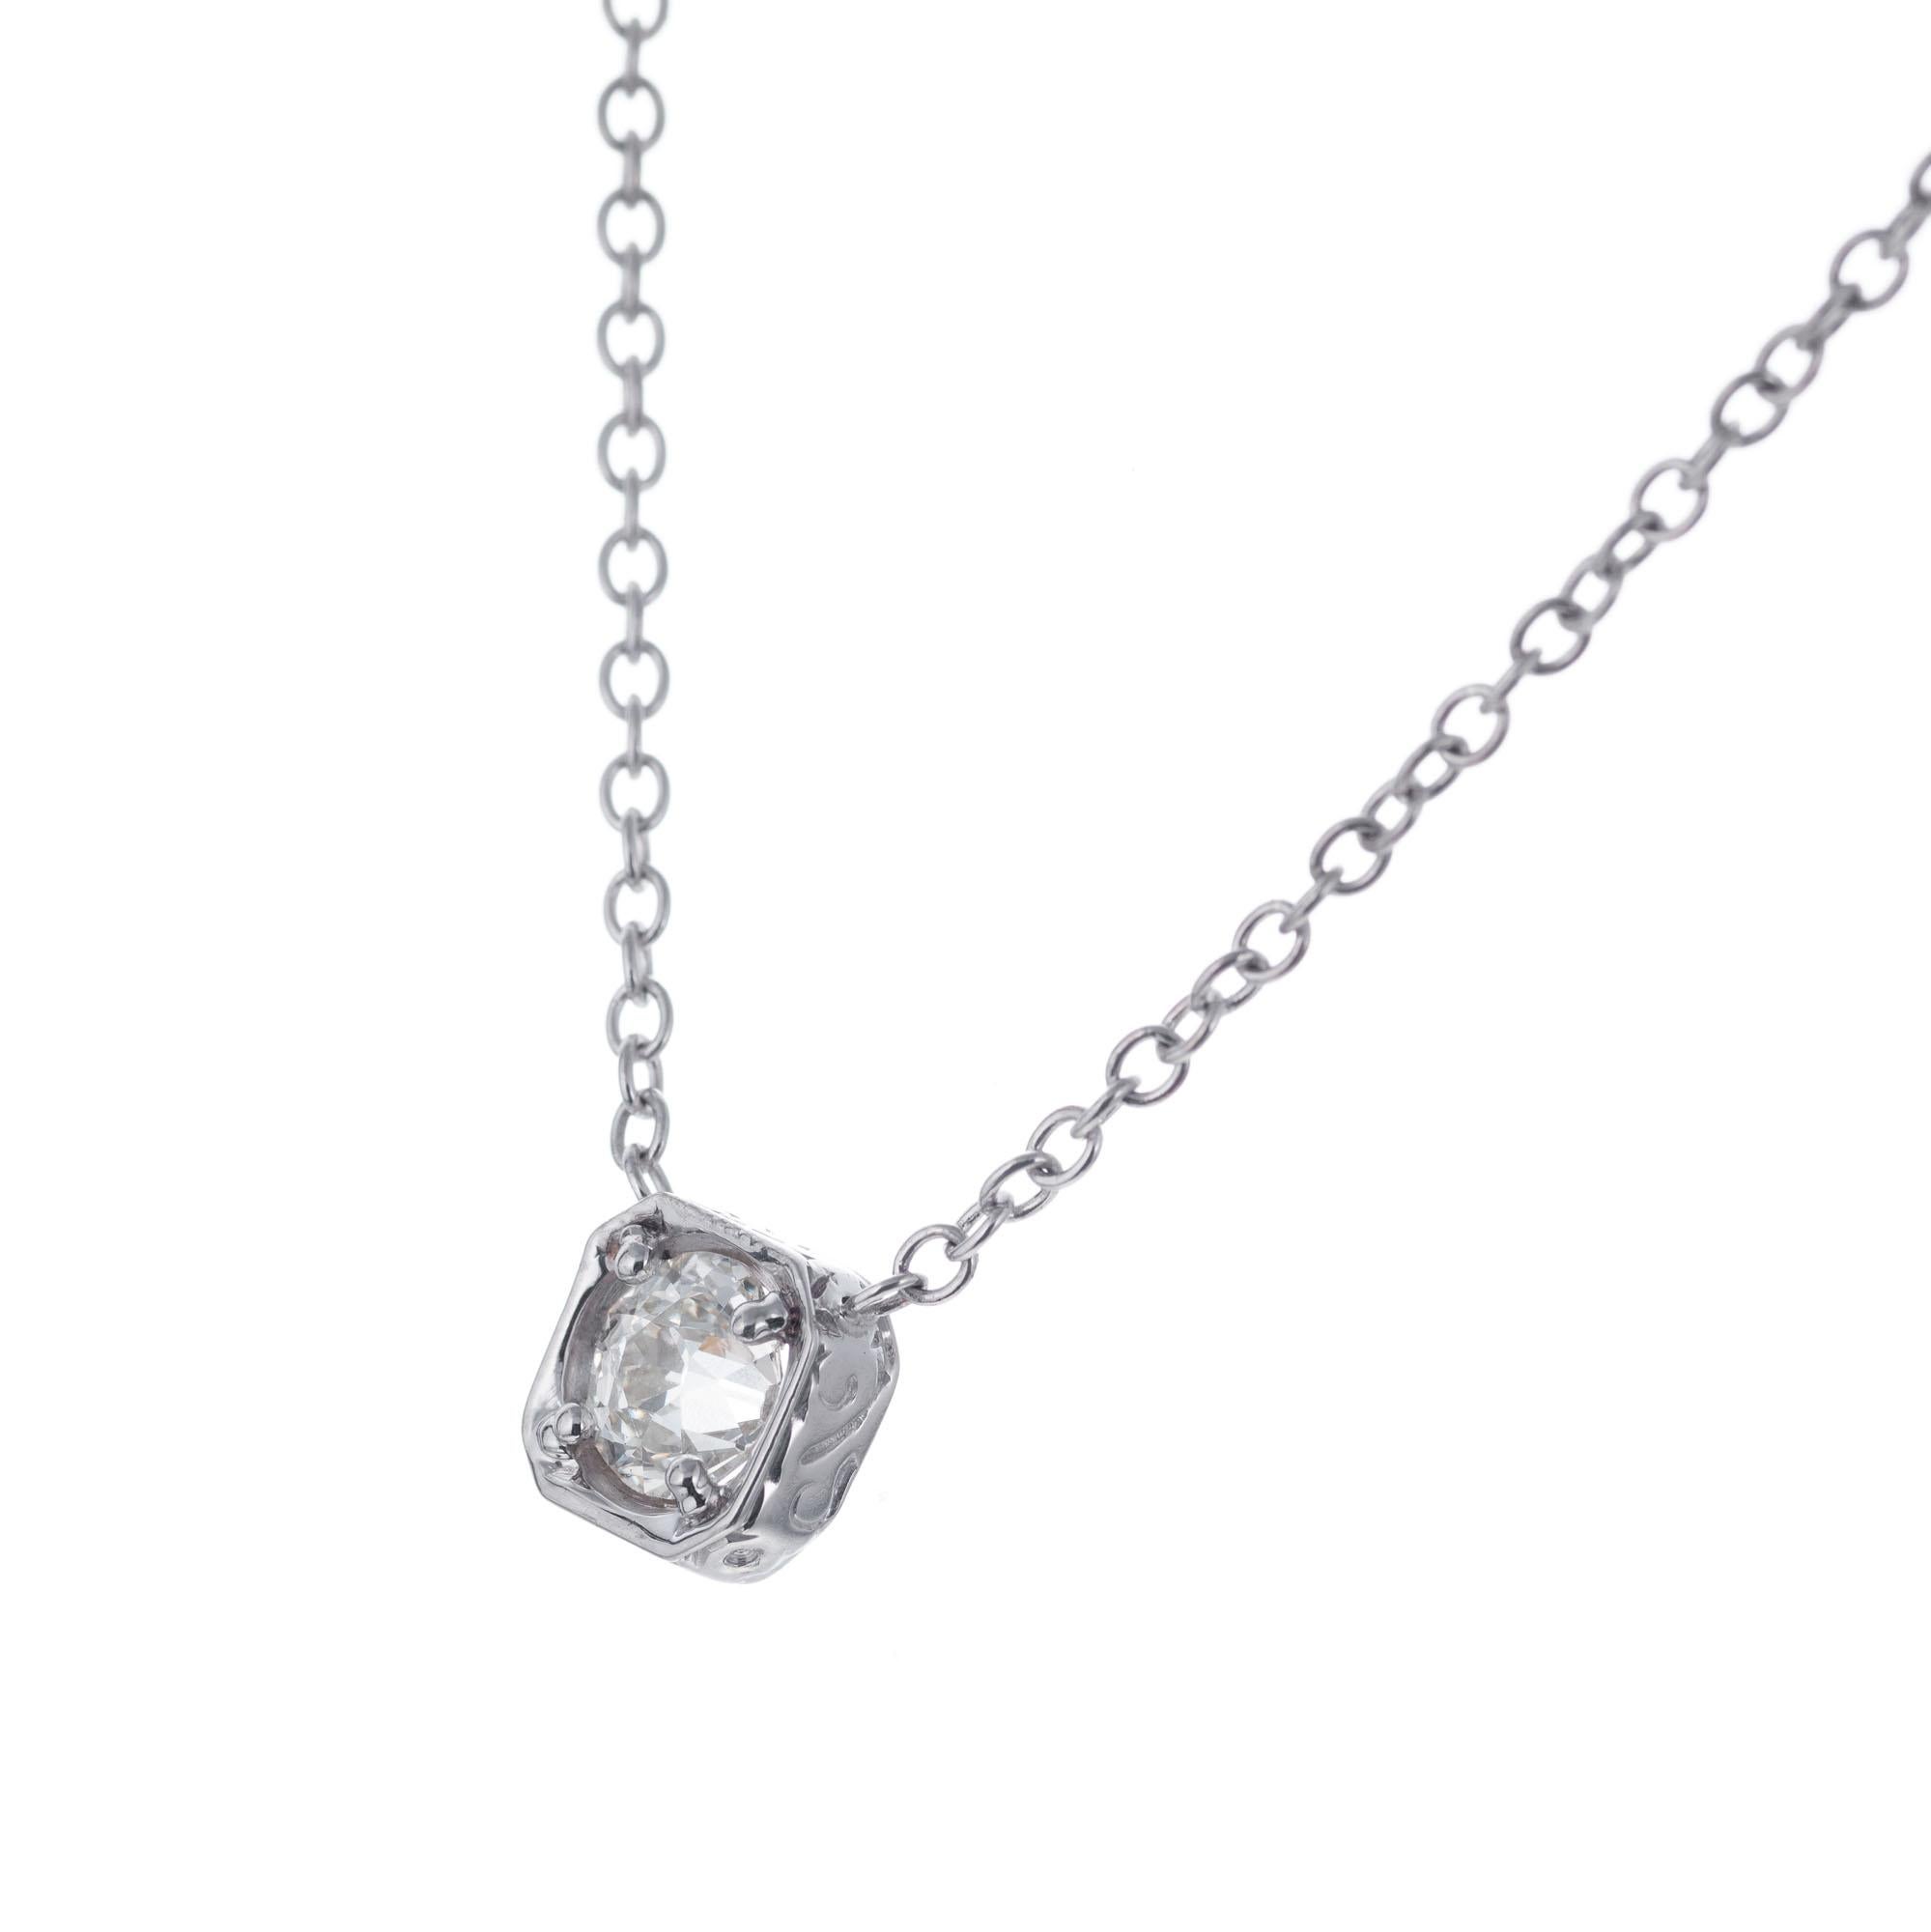 Old mine cut diamond, set in a eight sided 18k white gold setting. 18k White gold 16 inch chain.

1 old mine cut diamond, approx. .77cts
18k white gold 
3.7 grams
Chain: 16 Inches


